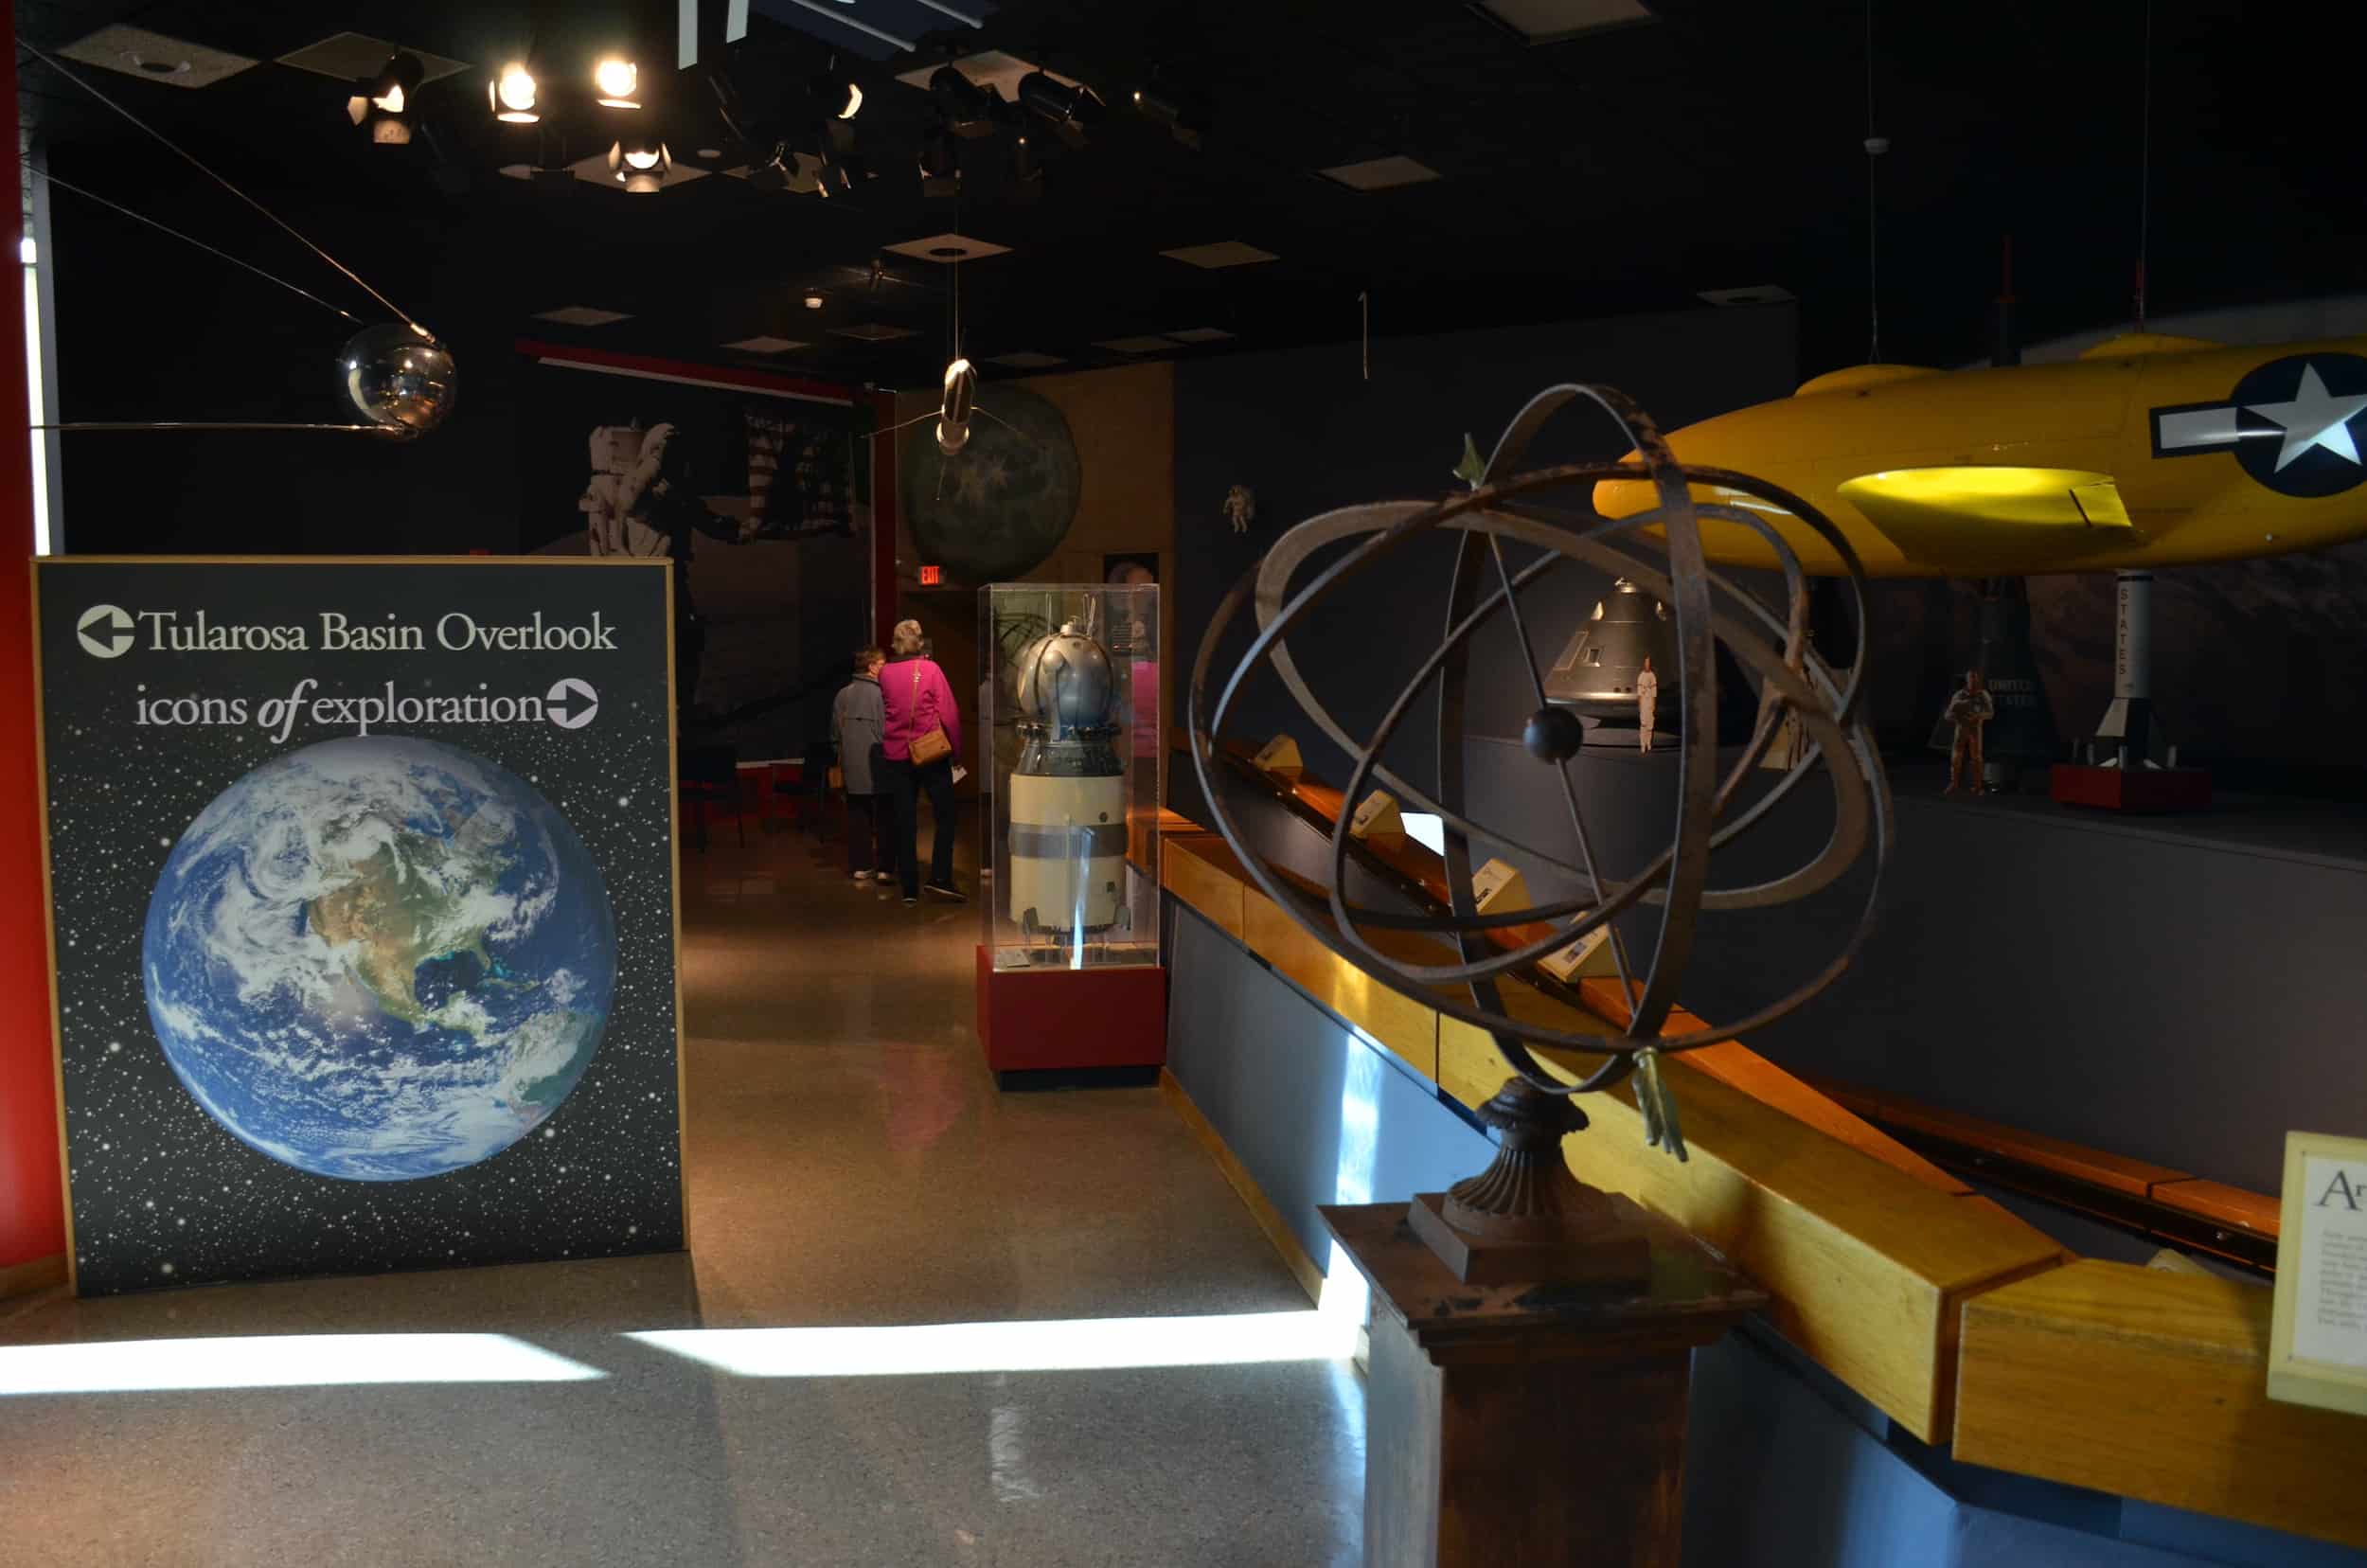 Icons of Exploration at the New Mexico Museum of Space History in Alamogordo, New Mexico